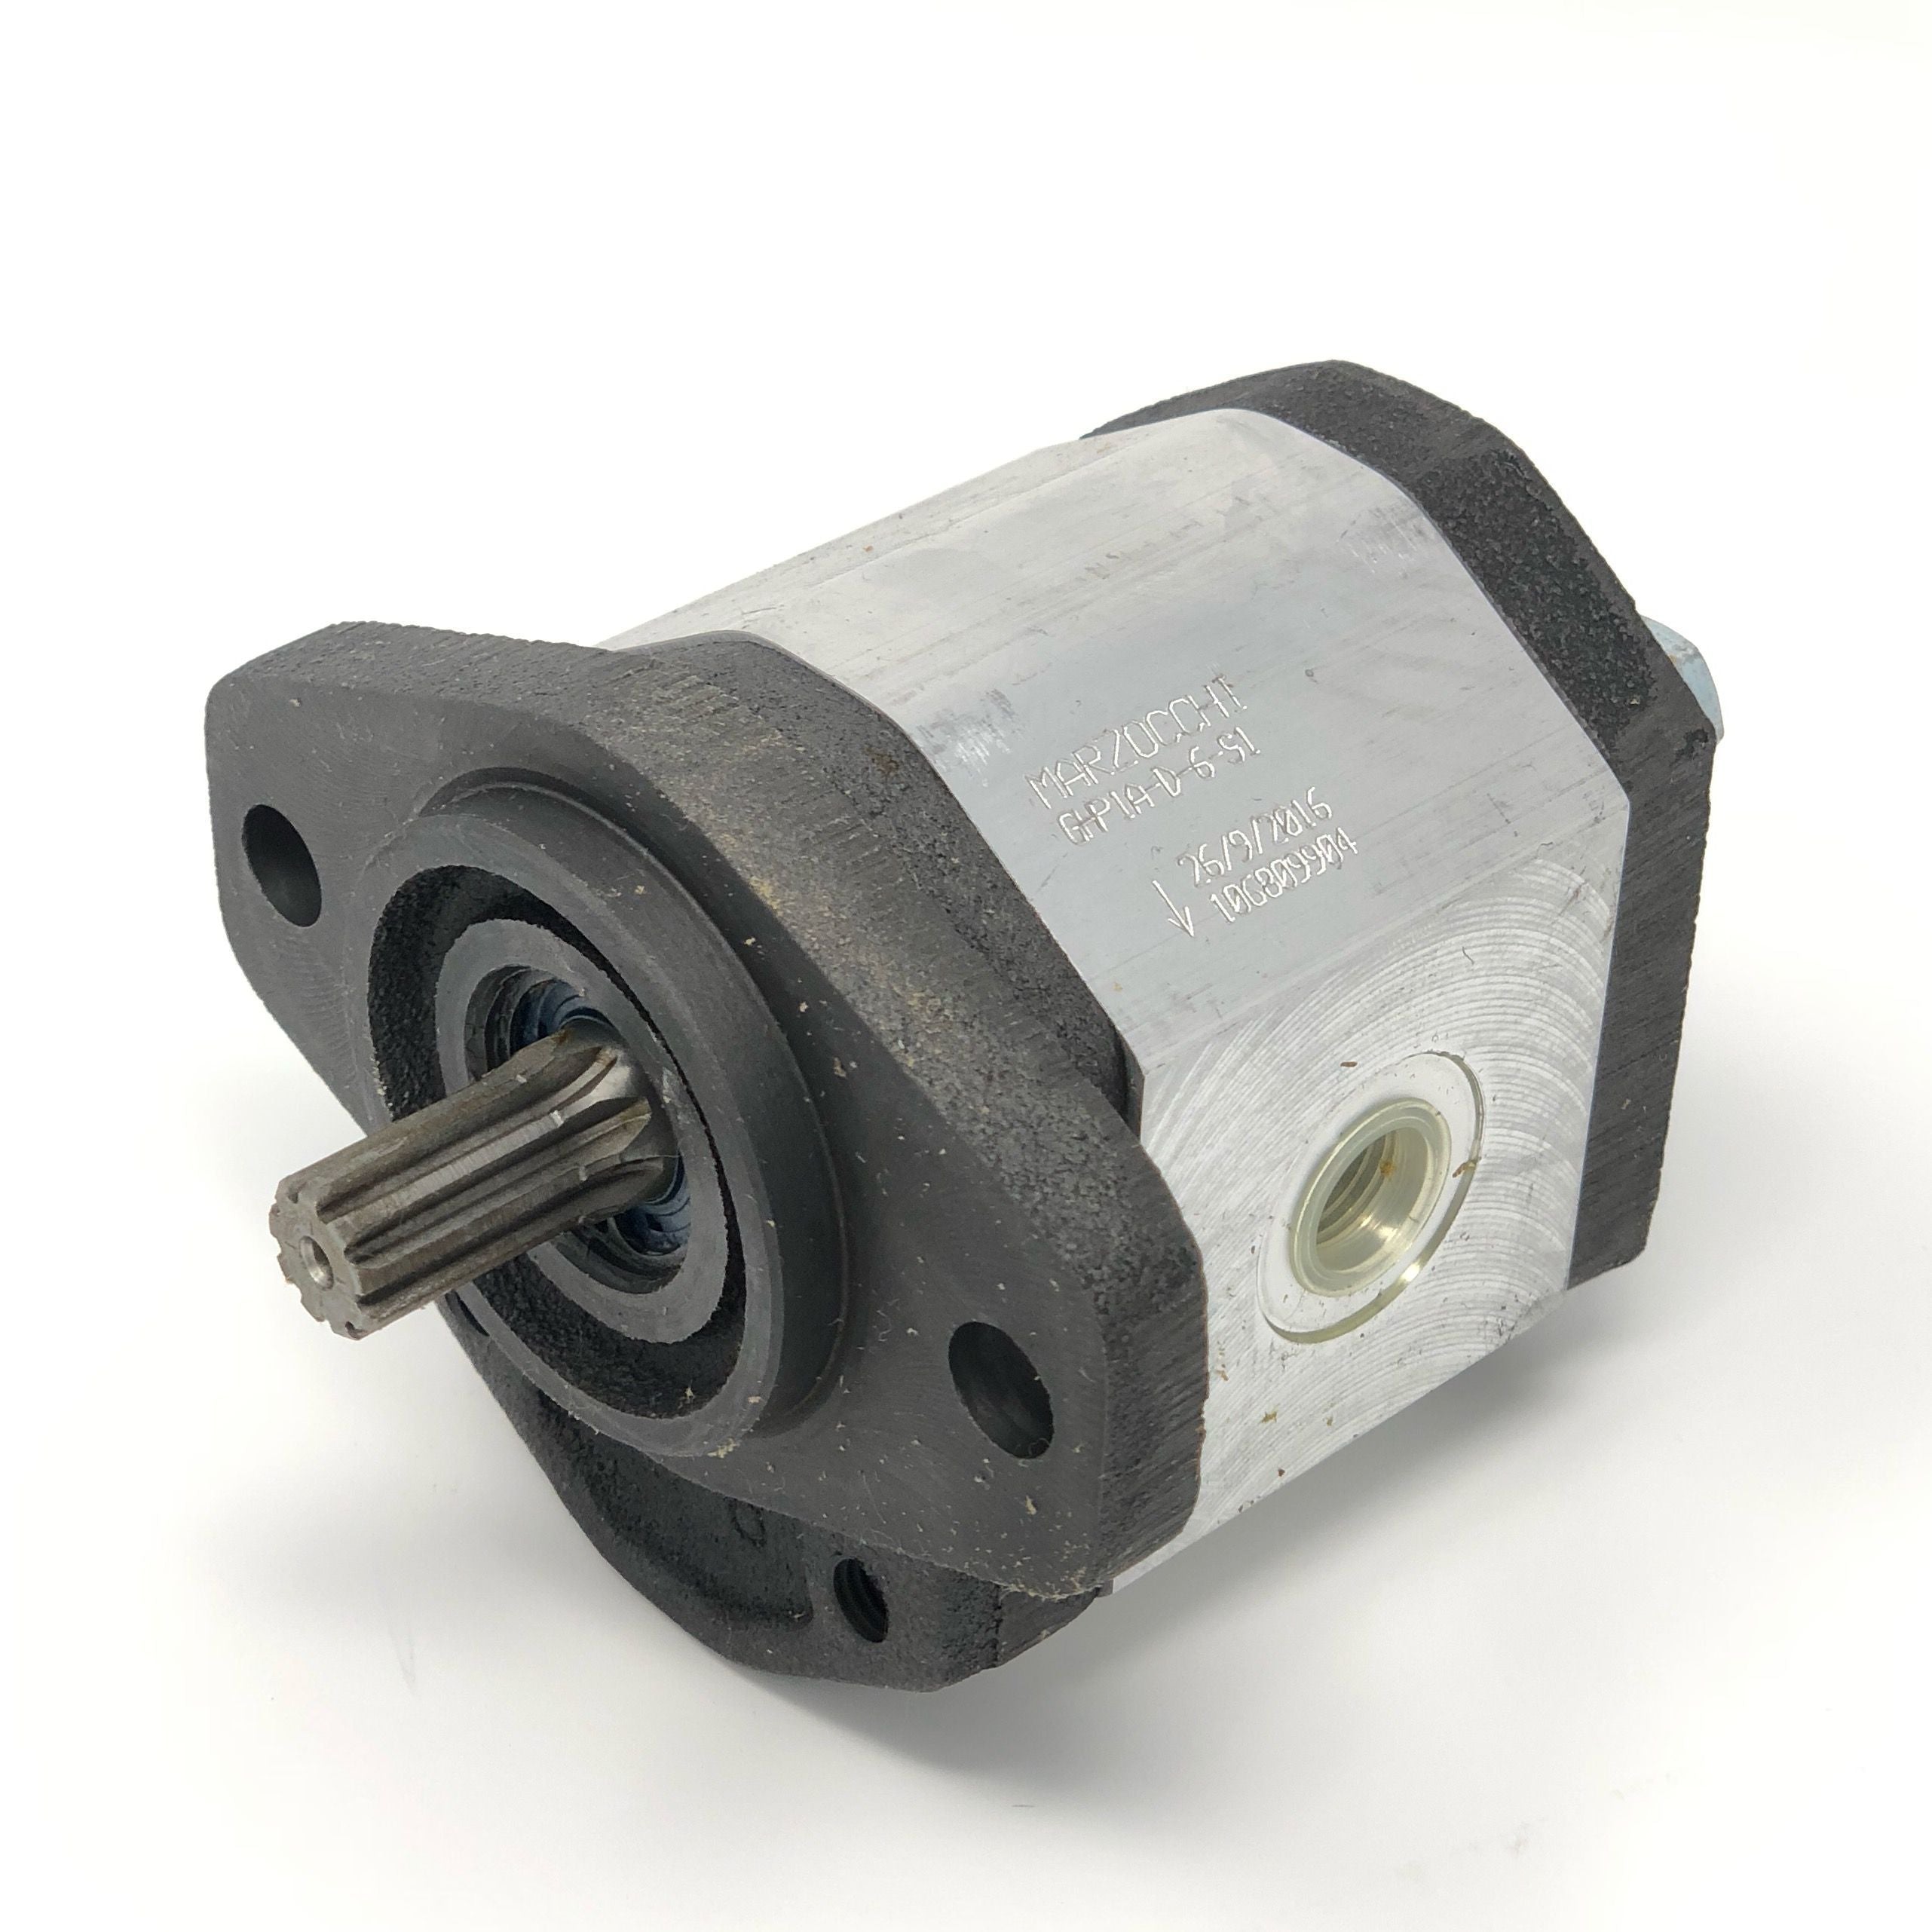 GHP1A-D-4-S1 : Marzocchi Gear Pump, CW, 2.8cc (0.1708in3), 1.33 GPM, 3915psi, 5000 RPM, #8 SAE (1/2") In, #6 SAE (3/8") Out, Splined Shaft 9T 20/40DP, SAE AA 2-Bolt Mount